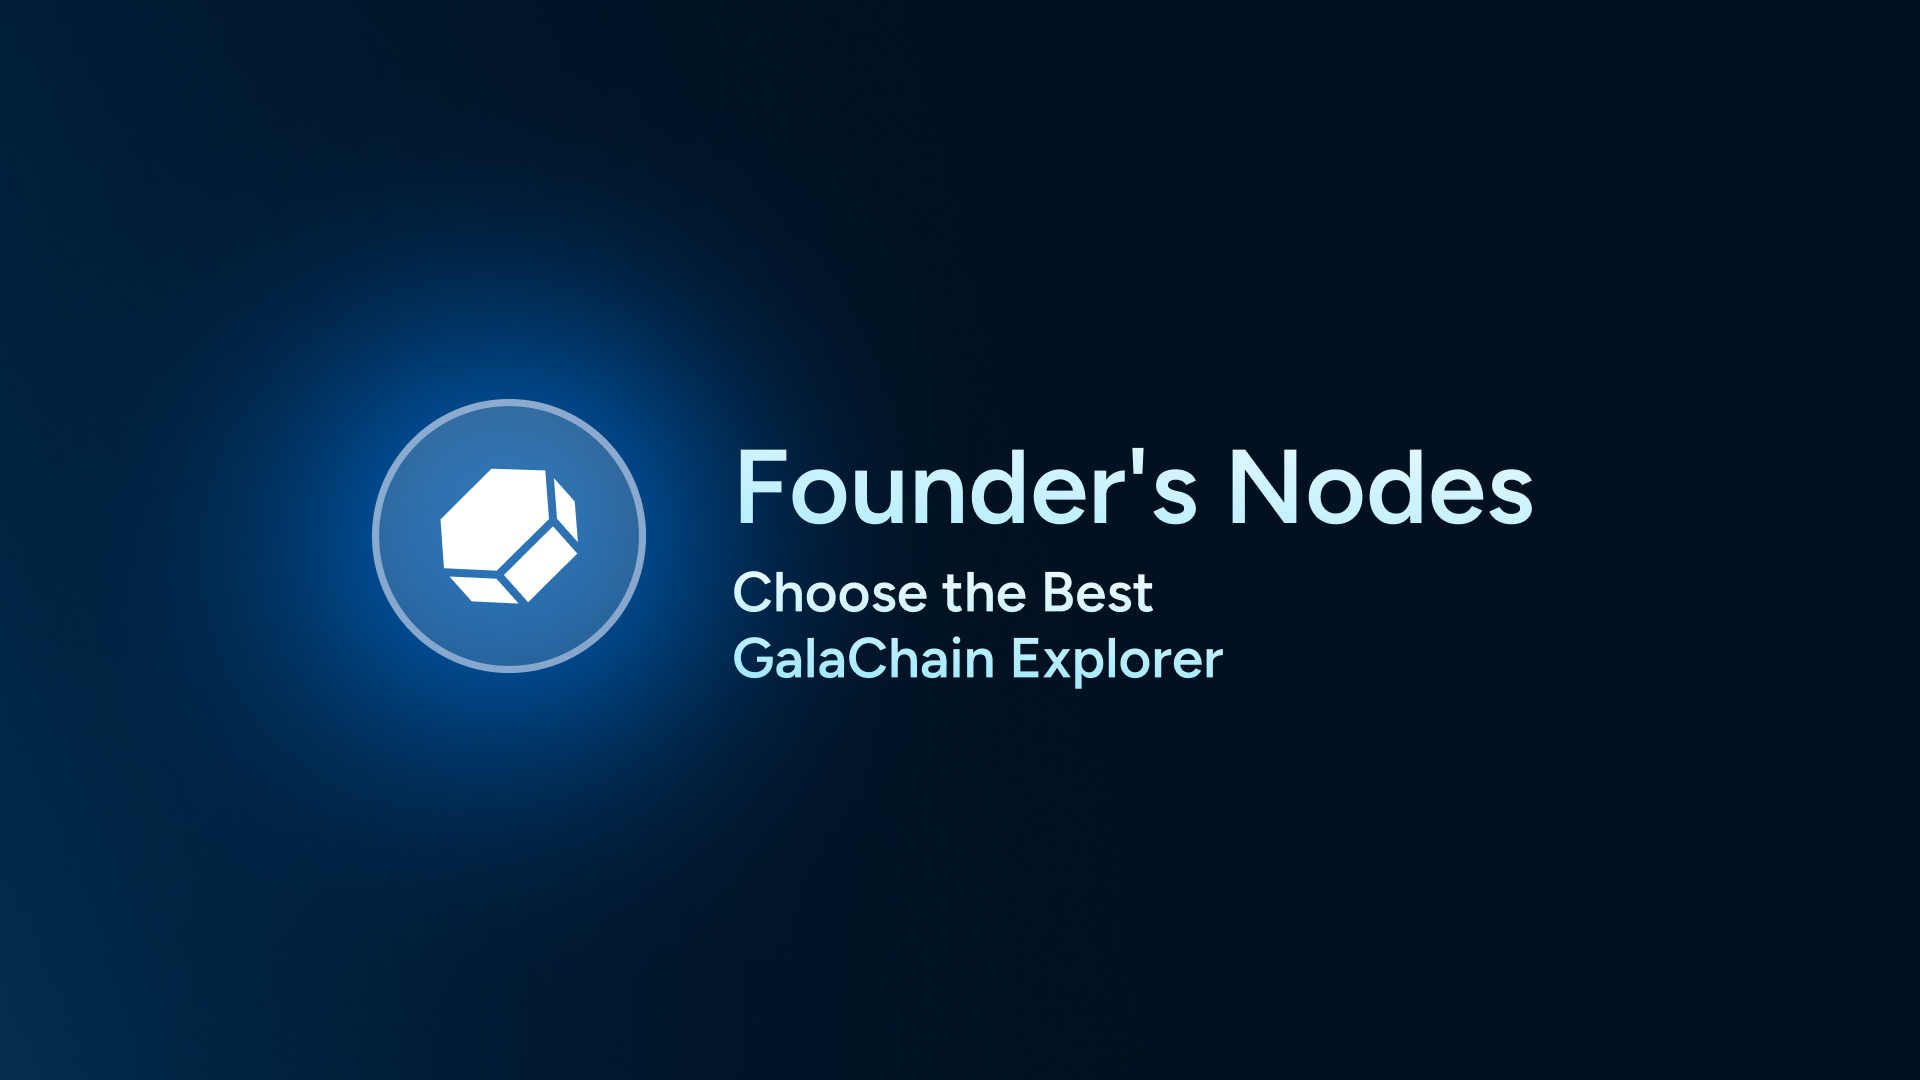 Gala Founder's Node operators will vote on the best community built GalaChain explorer.